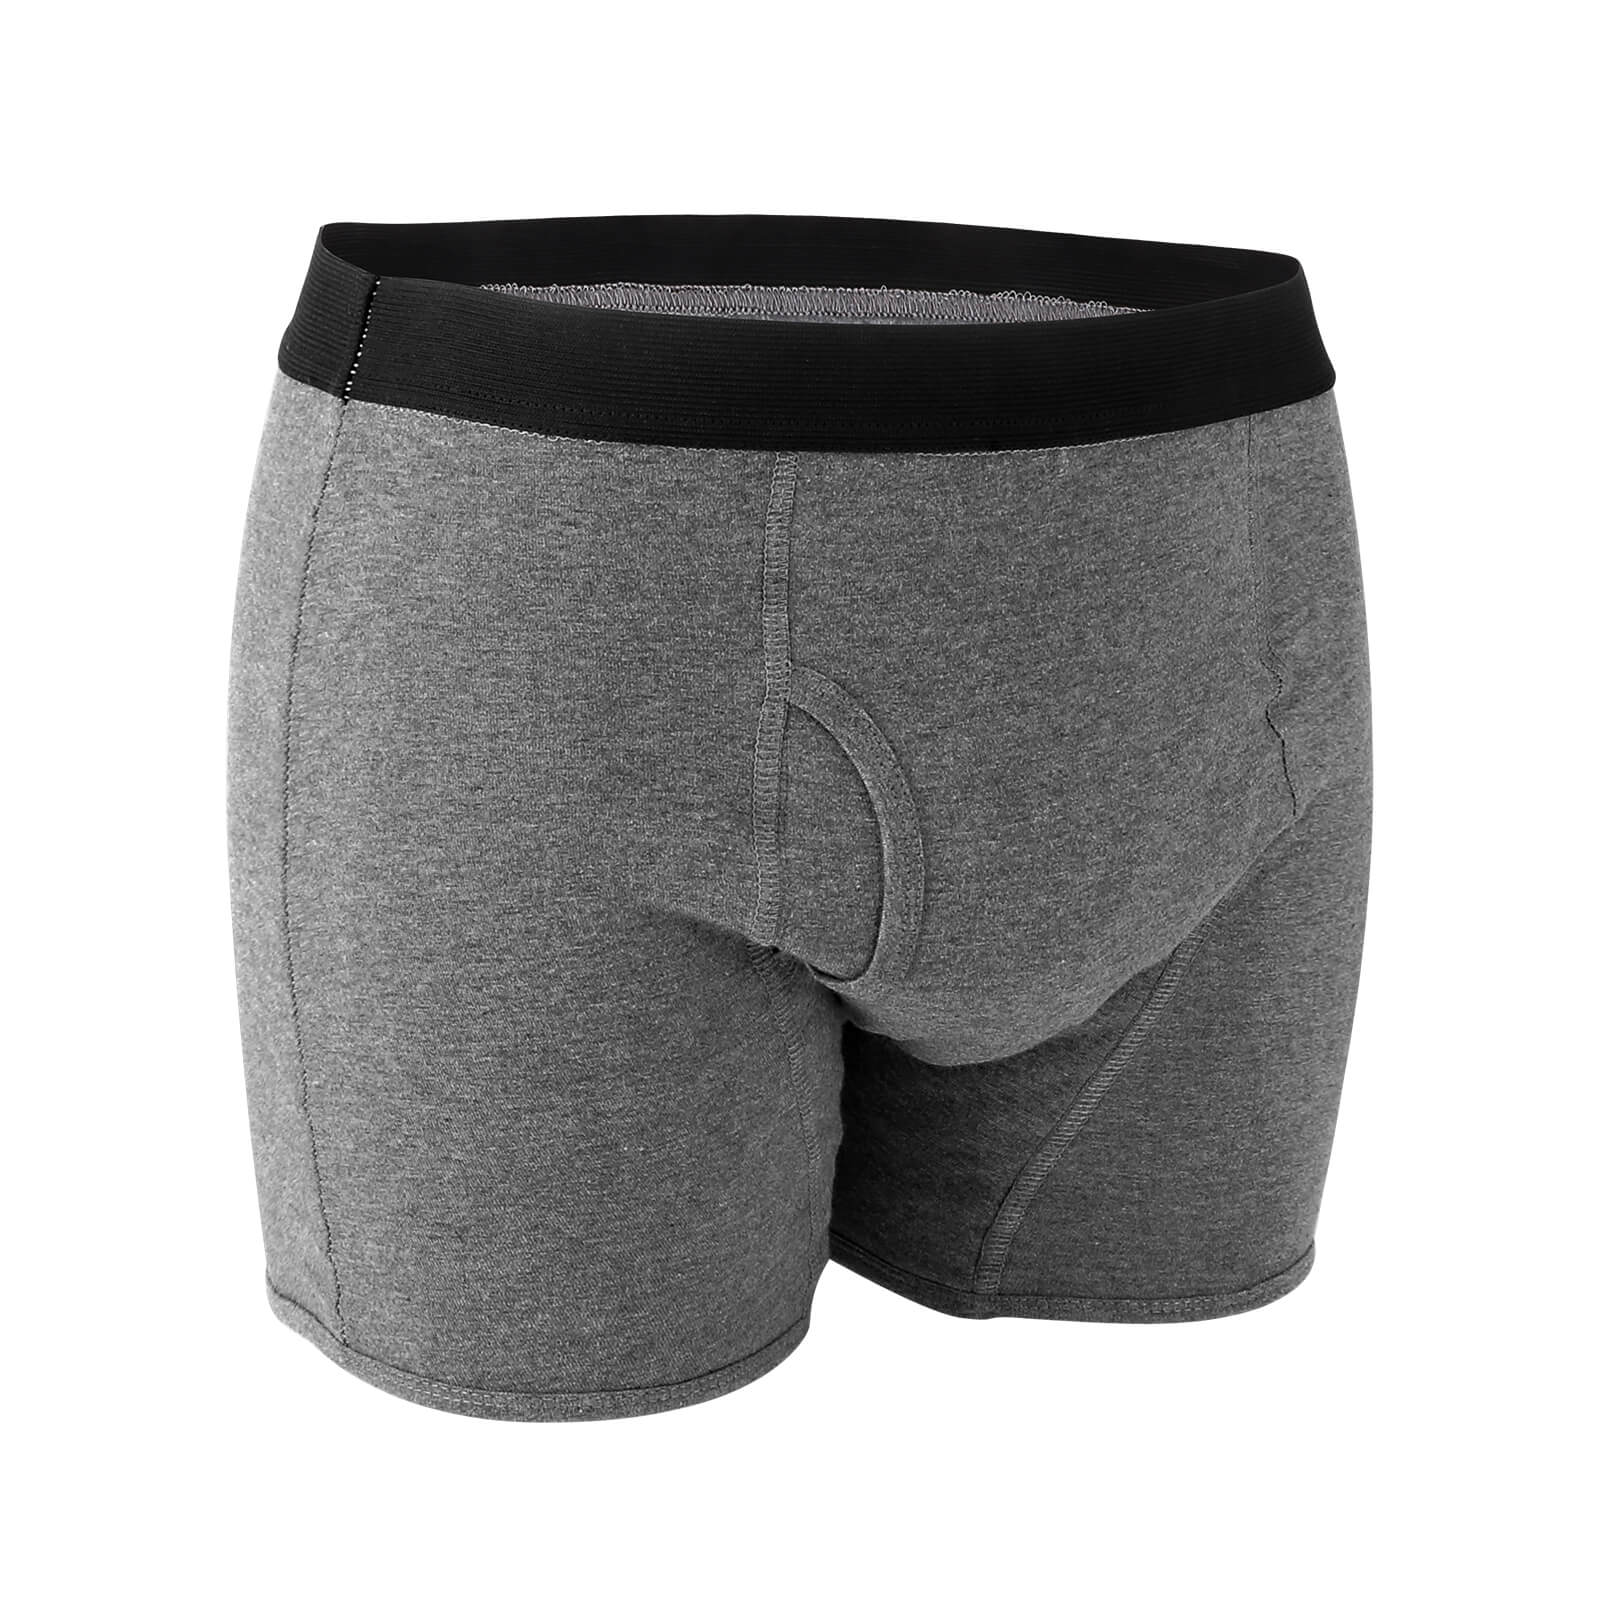 Mens Washable Incontinence Underwear | Leak Proof Protection